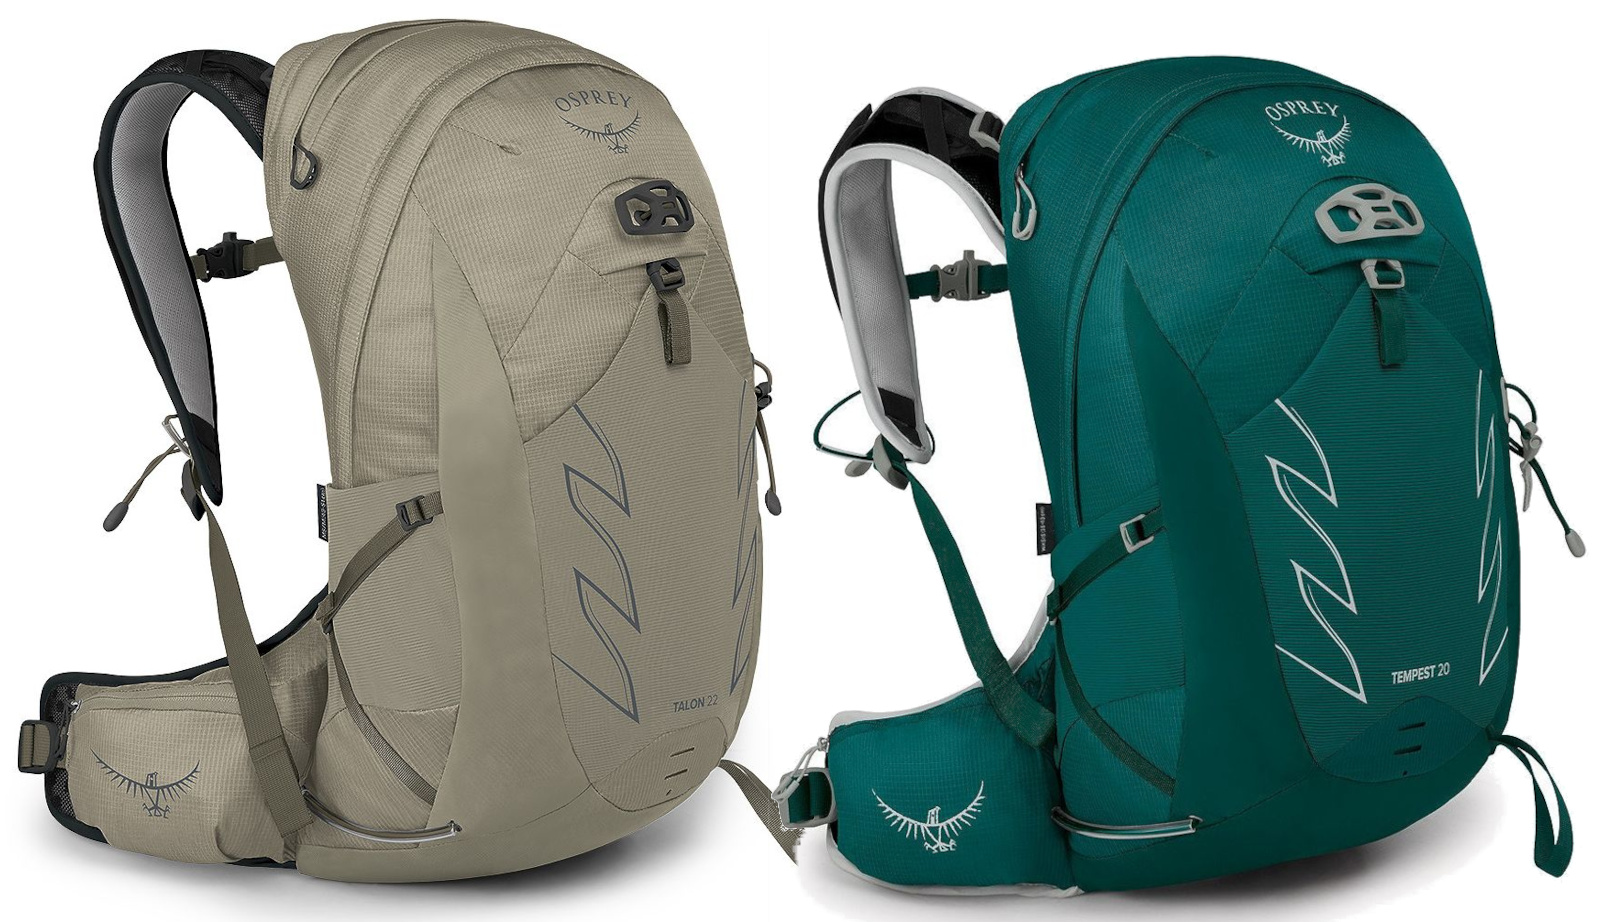 <p>These daypack-sized versions of the Talon and Tempest are made for bagging peaks, or biking to the local pub. Like larger models, these keep the lightweight design with the AirScape backpanel, continuous-wrap harness, and hipbelt. There are loops and tuck-away attachment points for stowing a trekking pole, ice axe, or bike helmet.</p> <p>Beyond the dual-zippered main compartment, there’s a secure interior mesh pocket and one in the top panel. The bag has several mesh pockets for stashing gear, including the stretch mesh side pockets for water bottles.</p> <a class="buy-now single" href="https://osprey.pxf.io/c/381569/1765694/20745?subId1=gjsposprey4thq224&u=https%3A%2F%2Fwww.osprey.com%2Ftalon-22-talon22f20-262%3Fcolor%3DSawdust%252520Earl%252520Grey">Shop Talon 22L</a> <a class="buy-now single" href="https://osprey.pxf.io/c/381569/1765694/20745?subId1=gjsposprey4thq224&u=https%3A%2F%2Fwww.osprey.com%2Ftempest-20-tempest20f20-268%3Fcolor%3DKakio%252520Pink%252520Purple%252520Ink">Shop Tempest 20L</a>